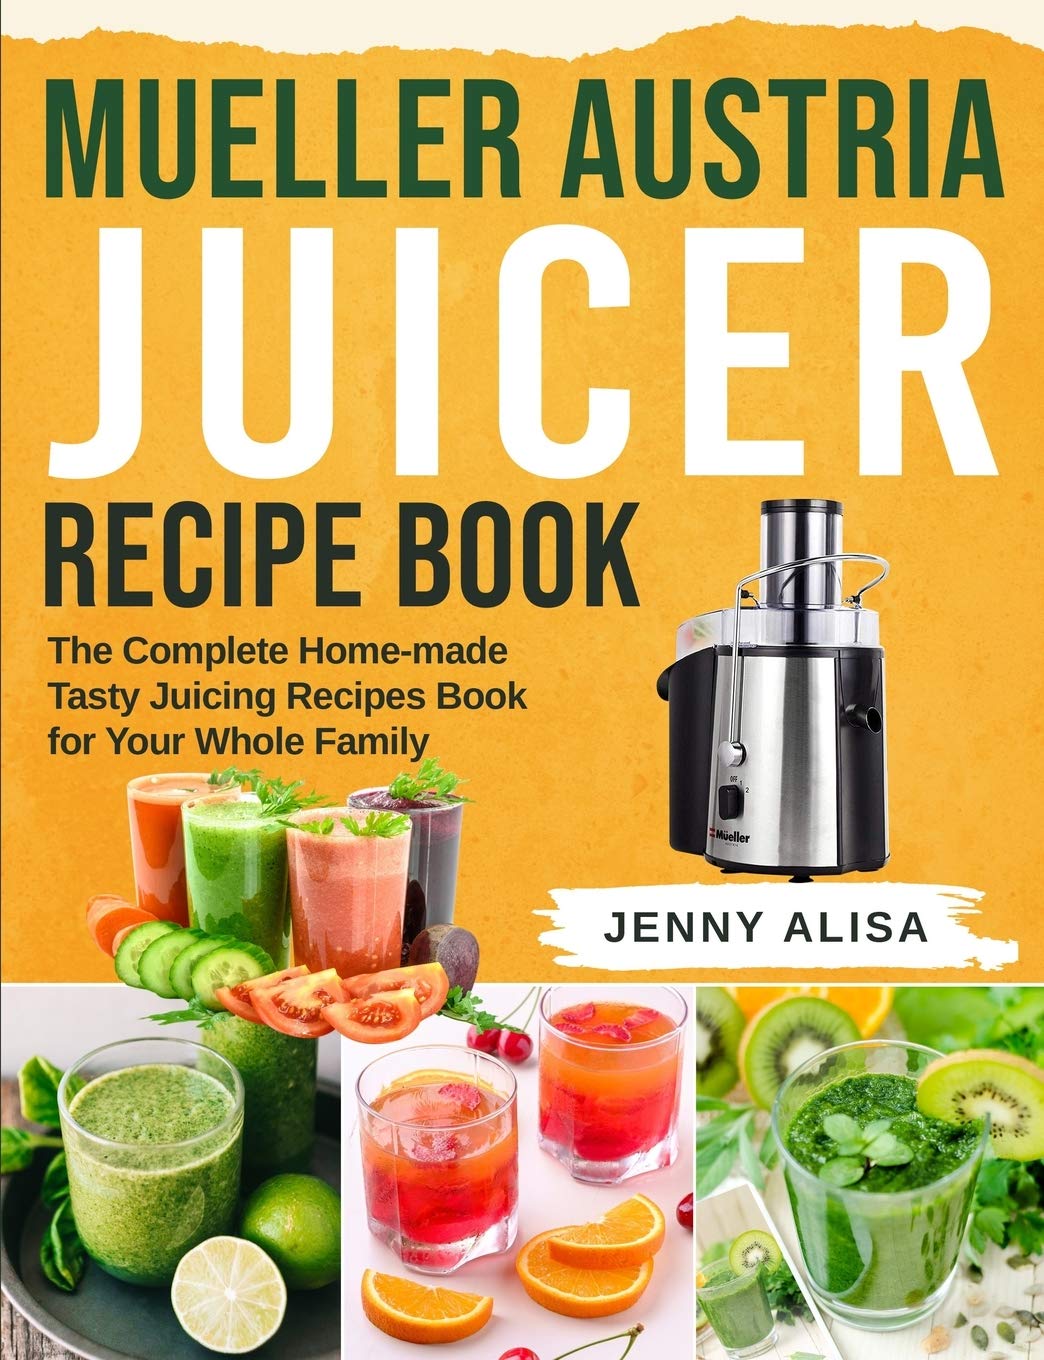 Mueller Austria Juicer Recipe Book: The Complete Home-made Tasty Juicing Recipes Book for Your Whole Family